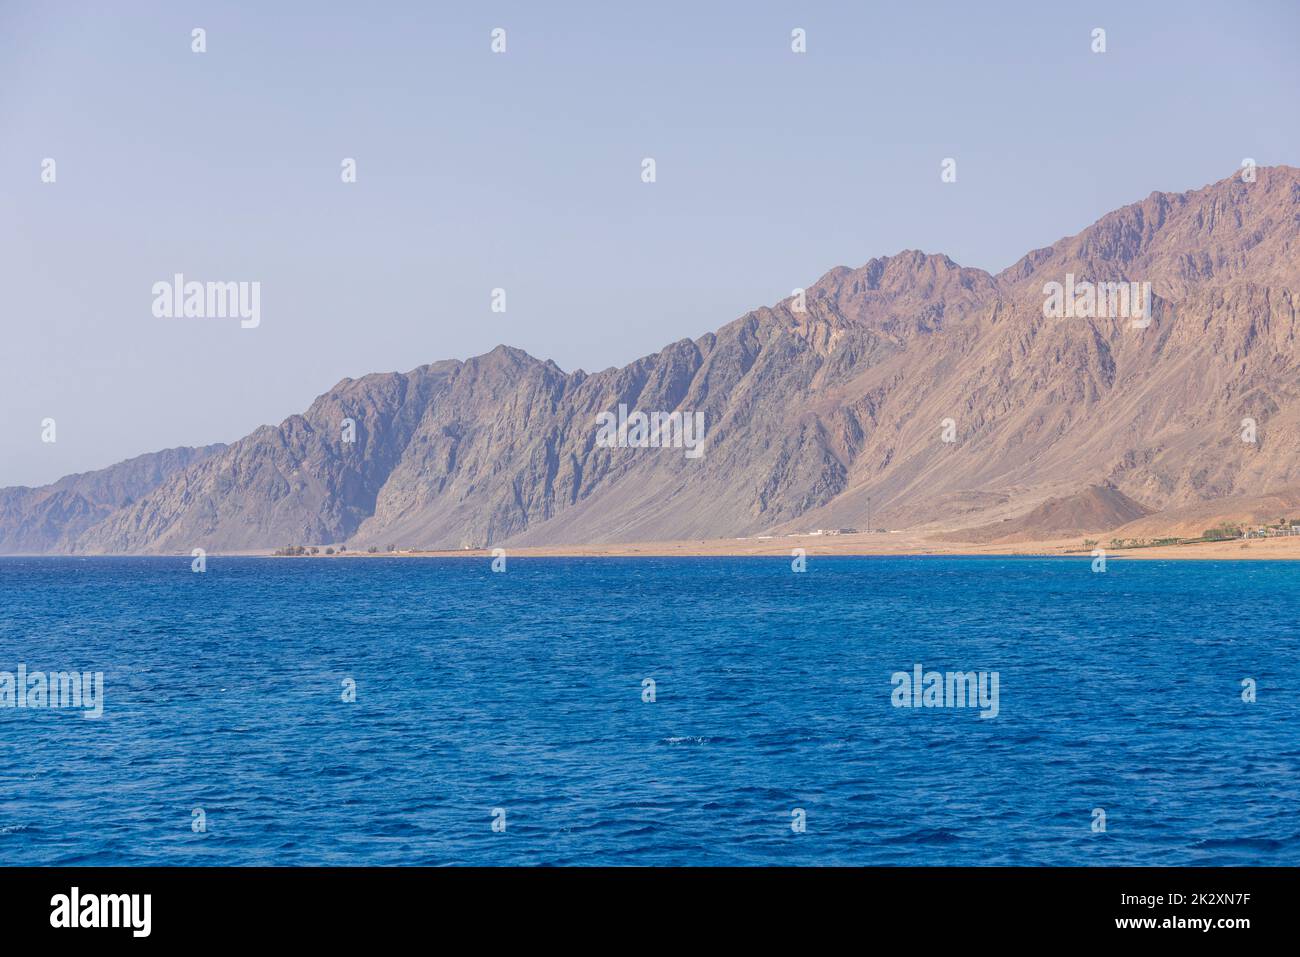 The Red Sea on the Gulf of Aqaba, surrounded by the mountains of the Sinai Peninsula, Dahab, Egypt Stock Photo